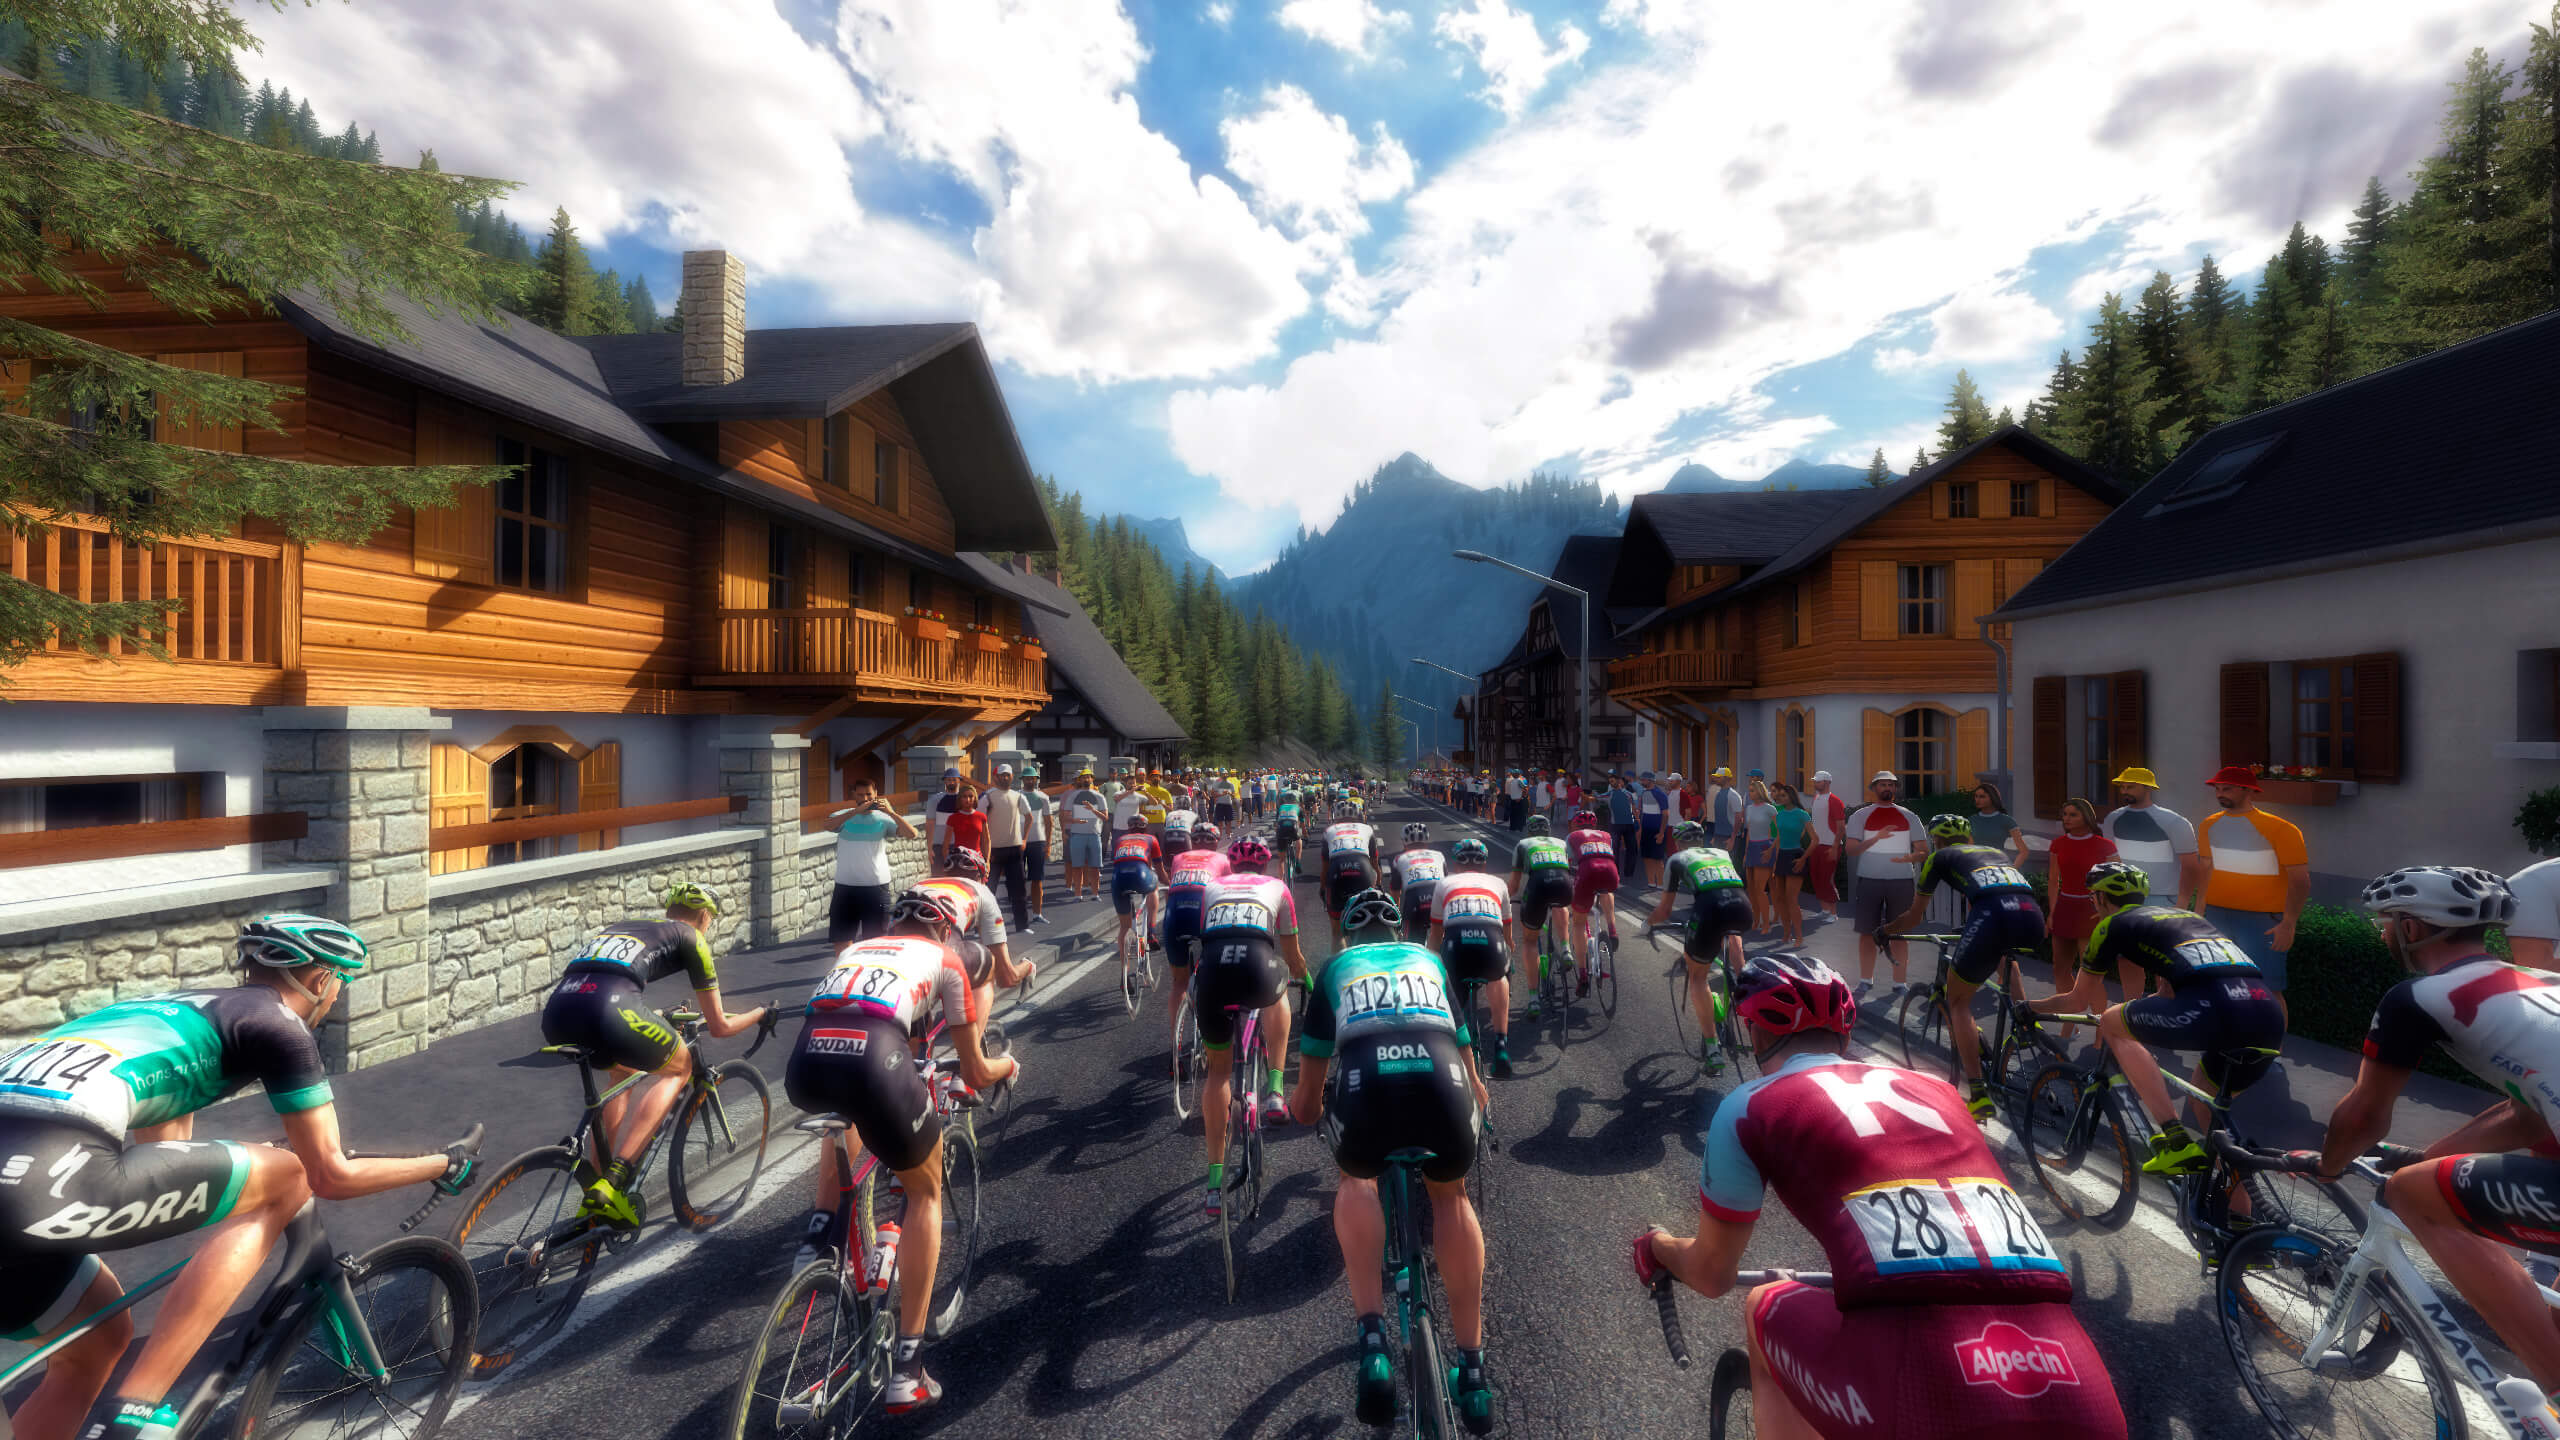 Pro cycling manager 2009 free download pc